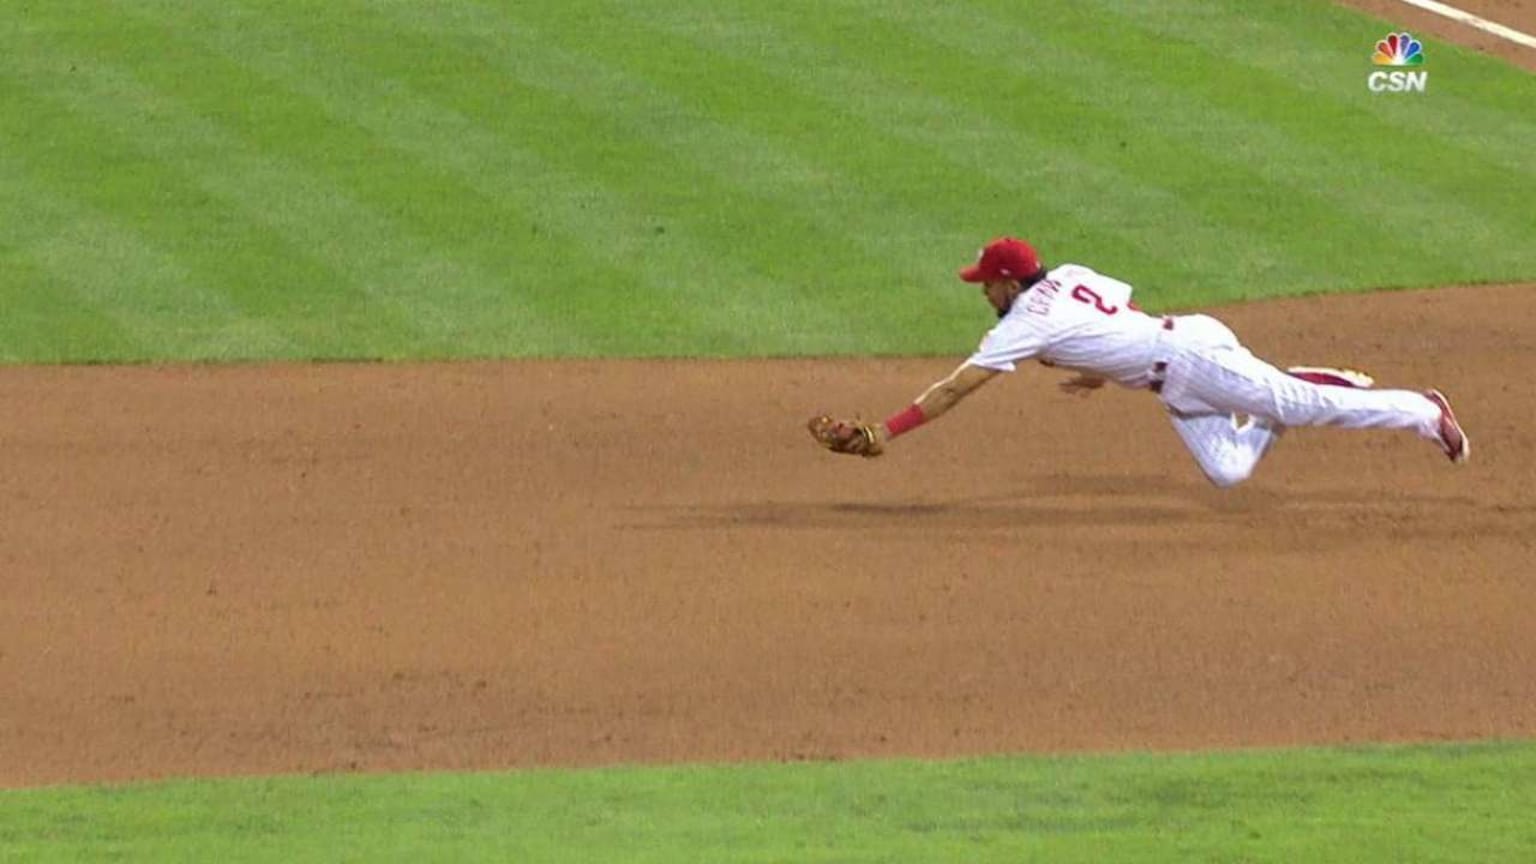 Watch: J.P. Crawford makes an acrobatic tag to prevent stolen base